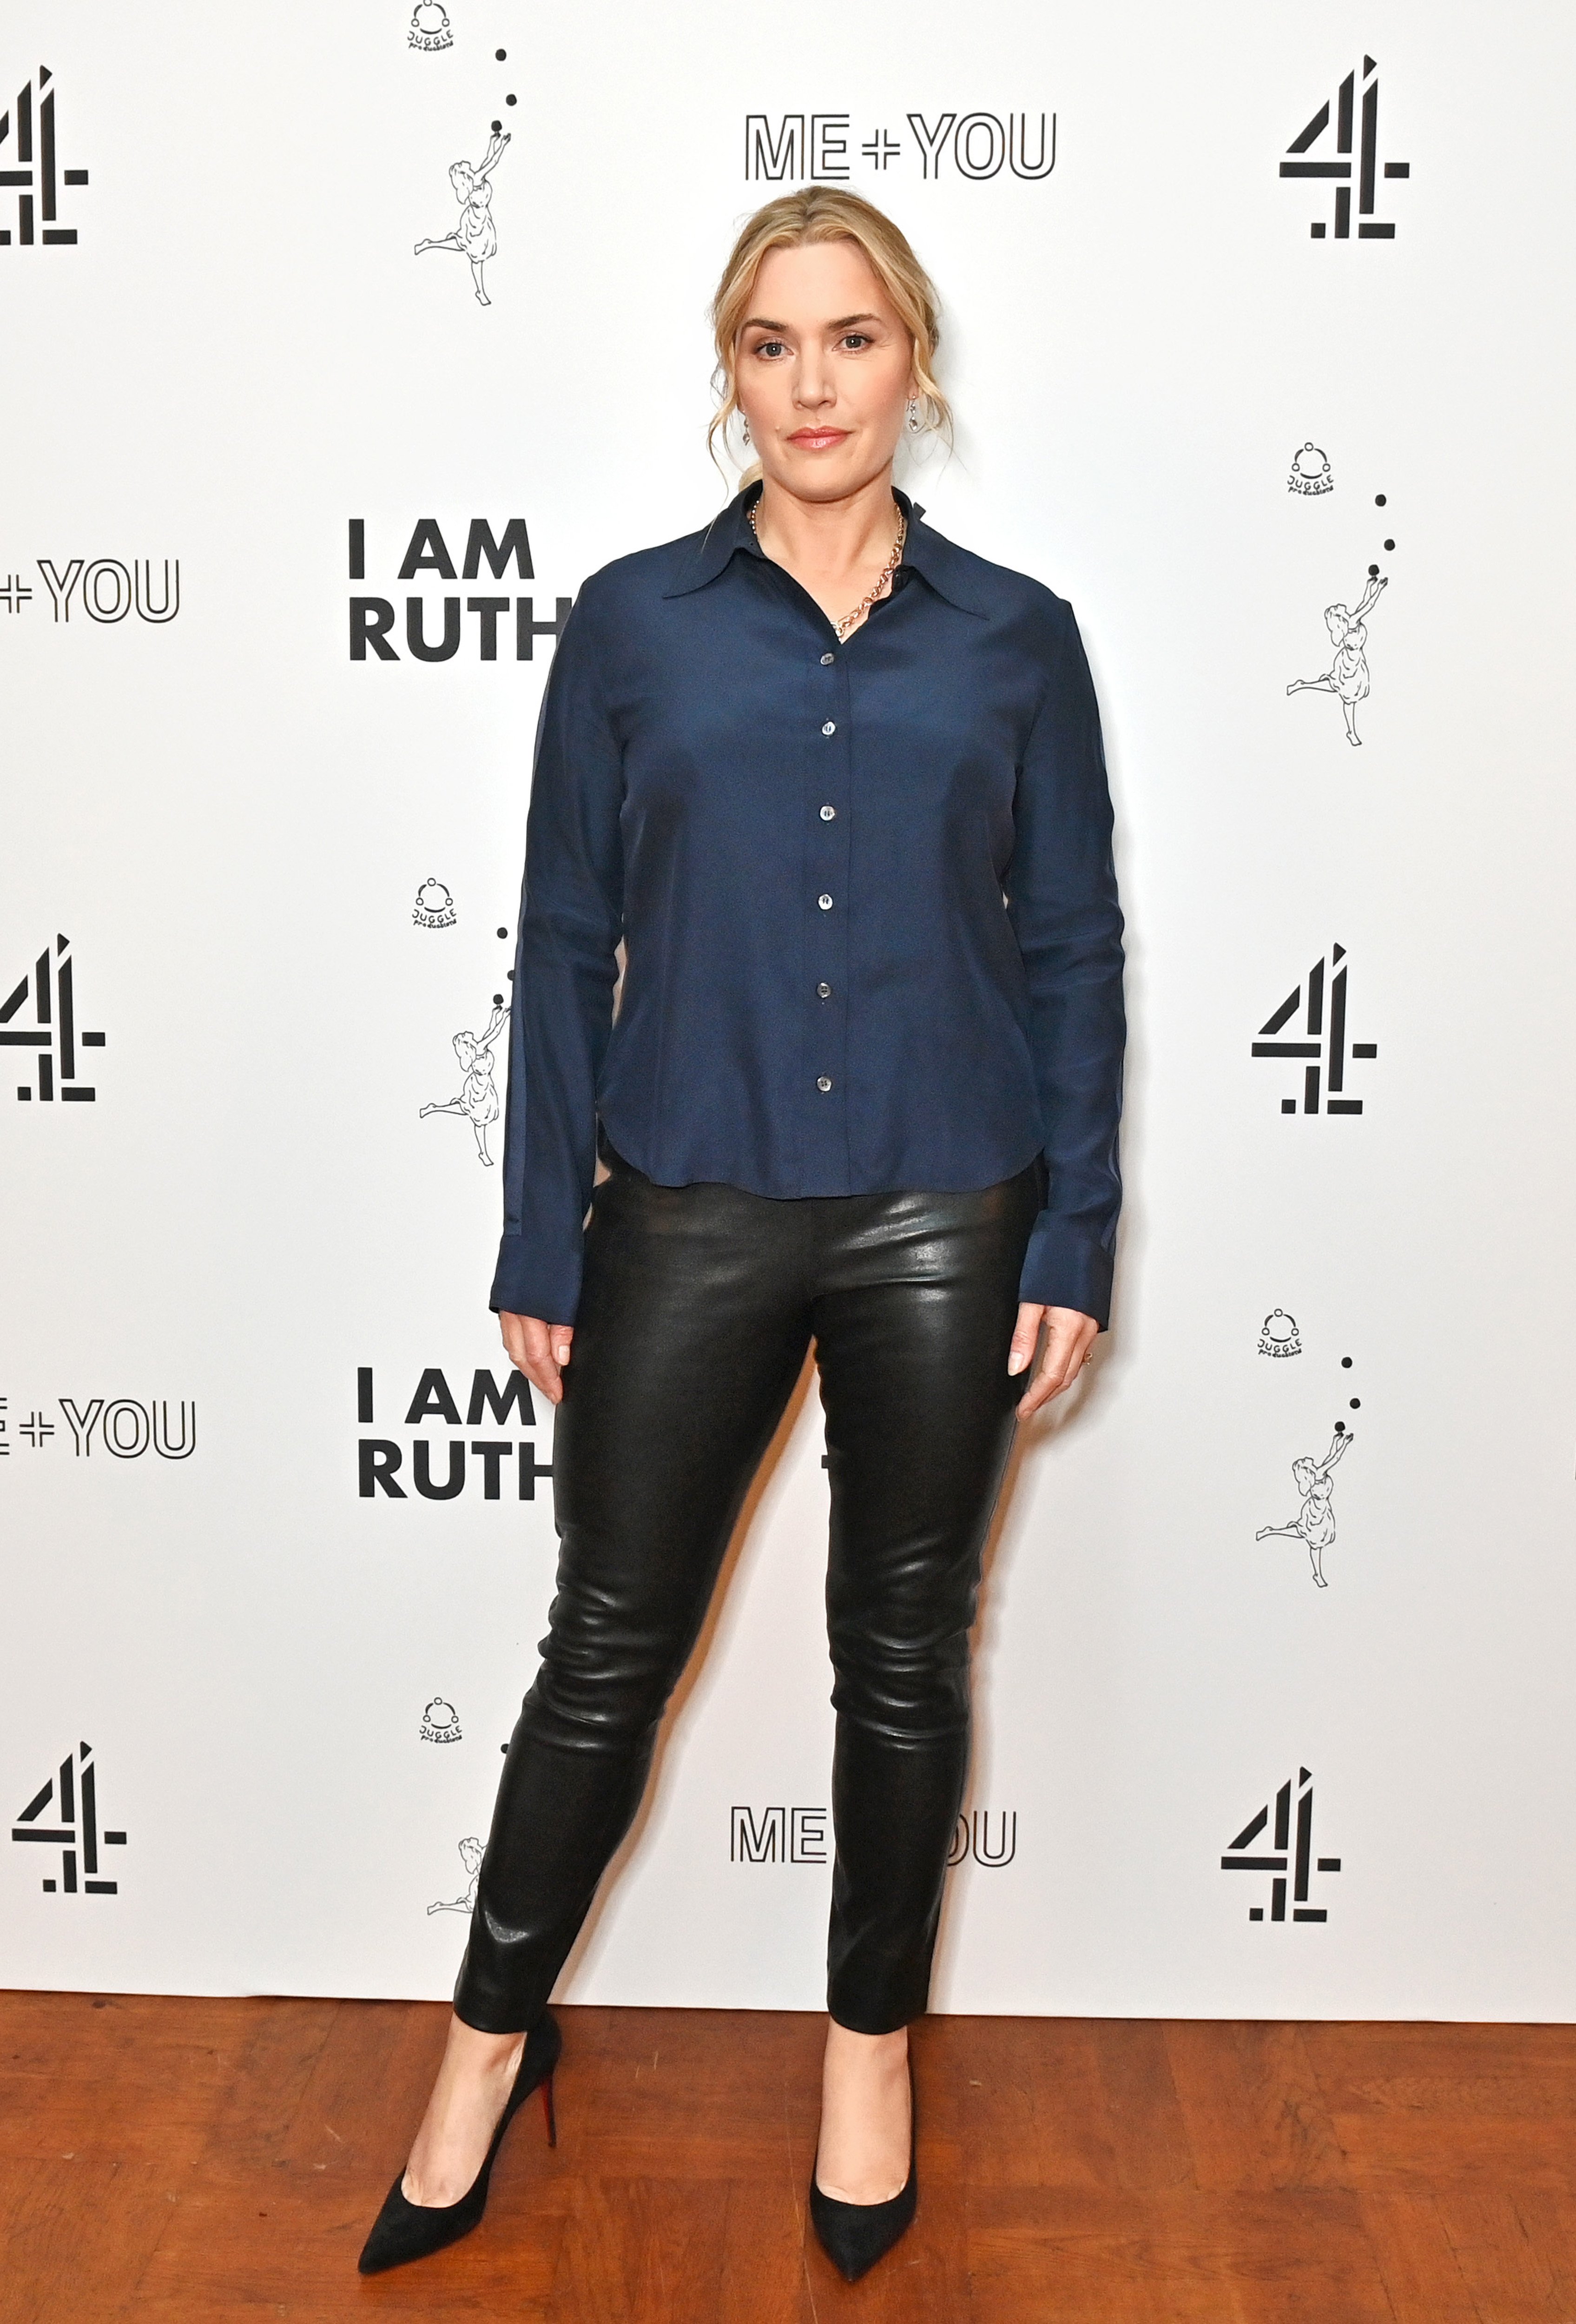 Kate Winslet at a photocall for "I Am Ruth" on December 1, 2022, in London, England | Source: Getty Images